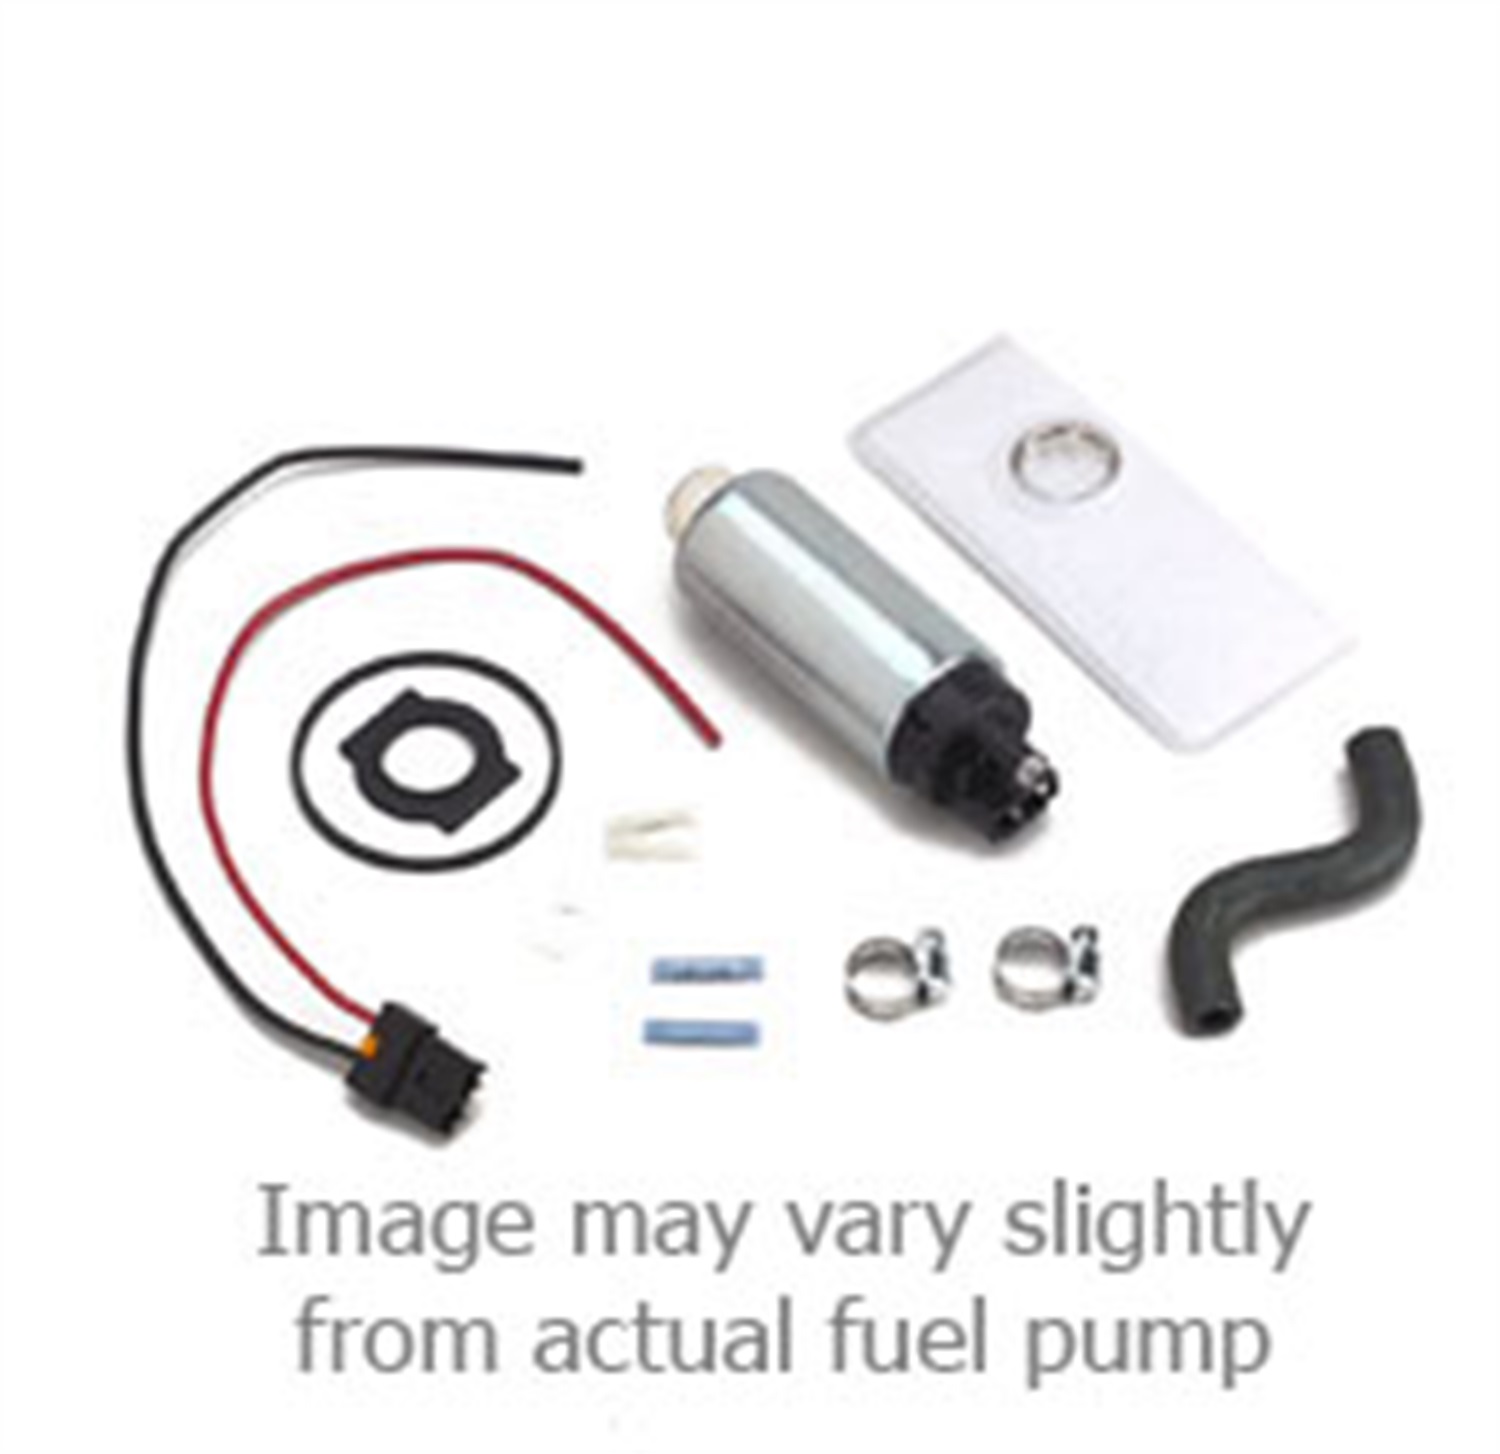 Holley Performance Holley Performance 12-900 Electric Fuel Pump; In-Tank Electric Fuel Pump